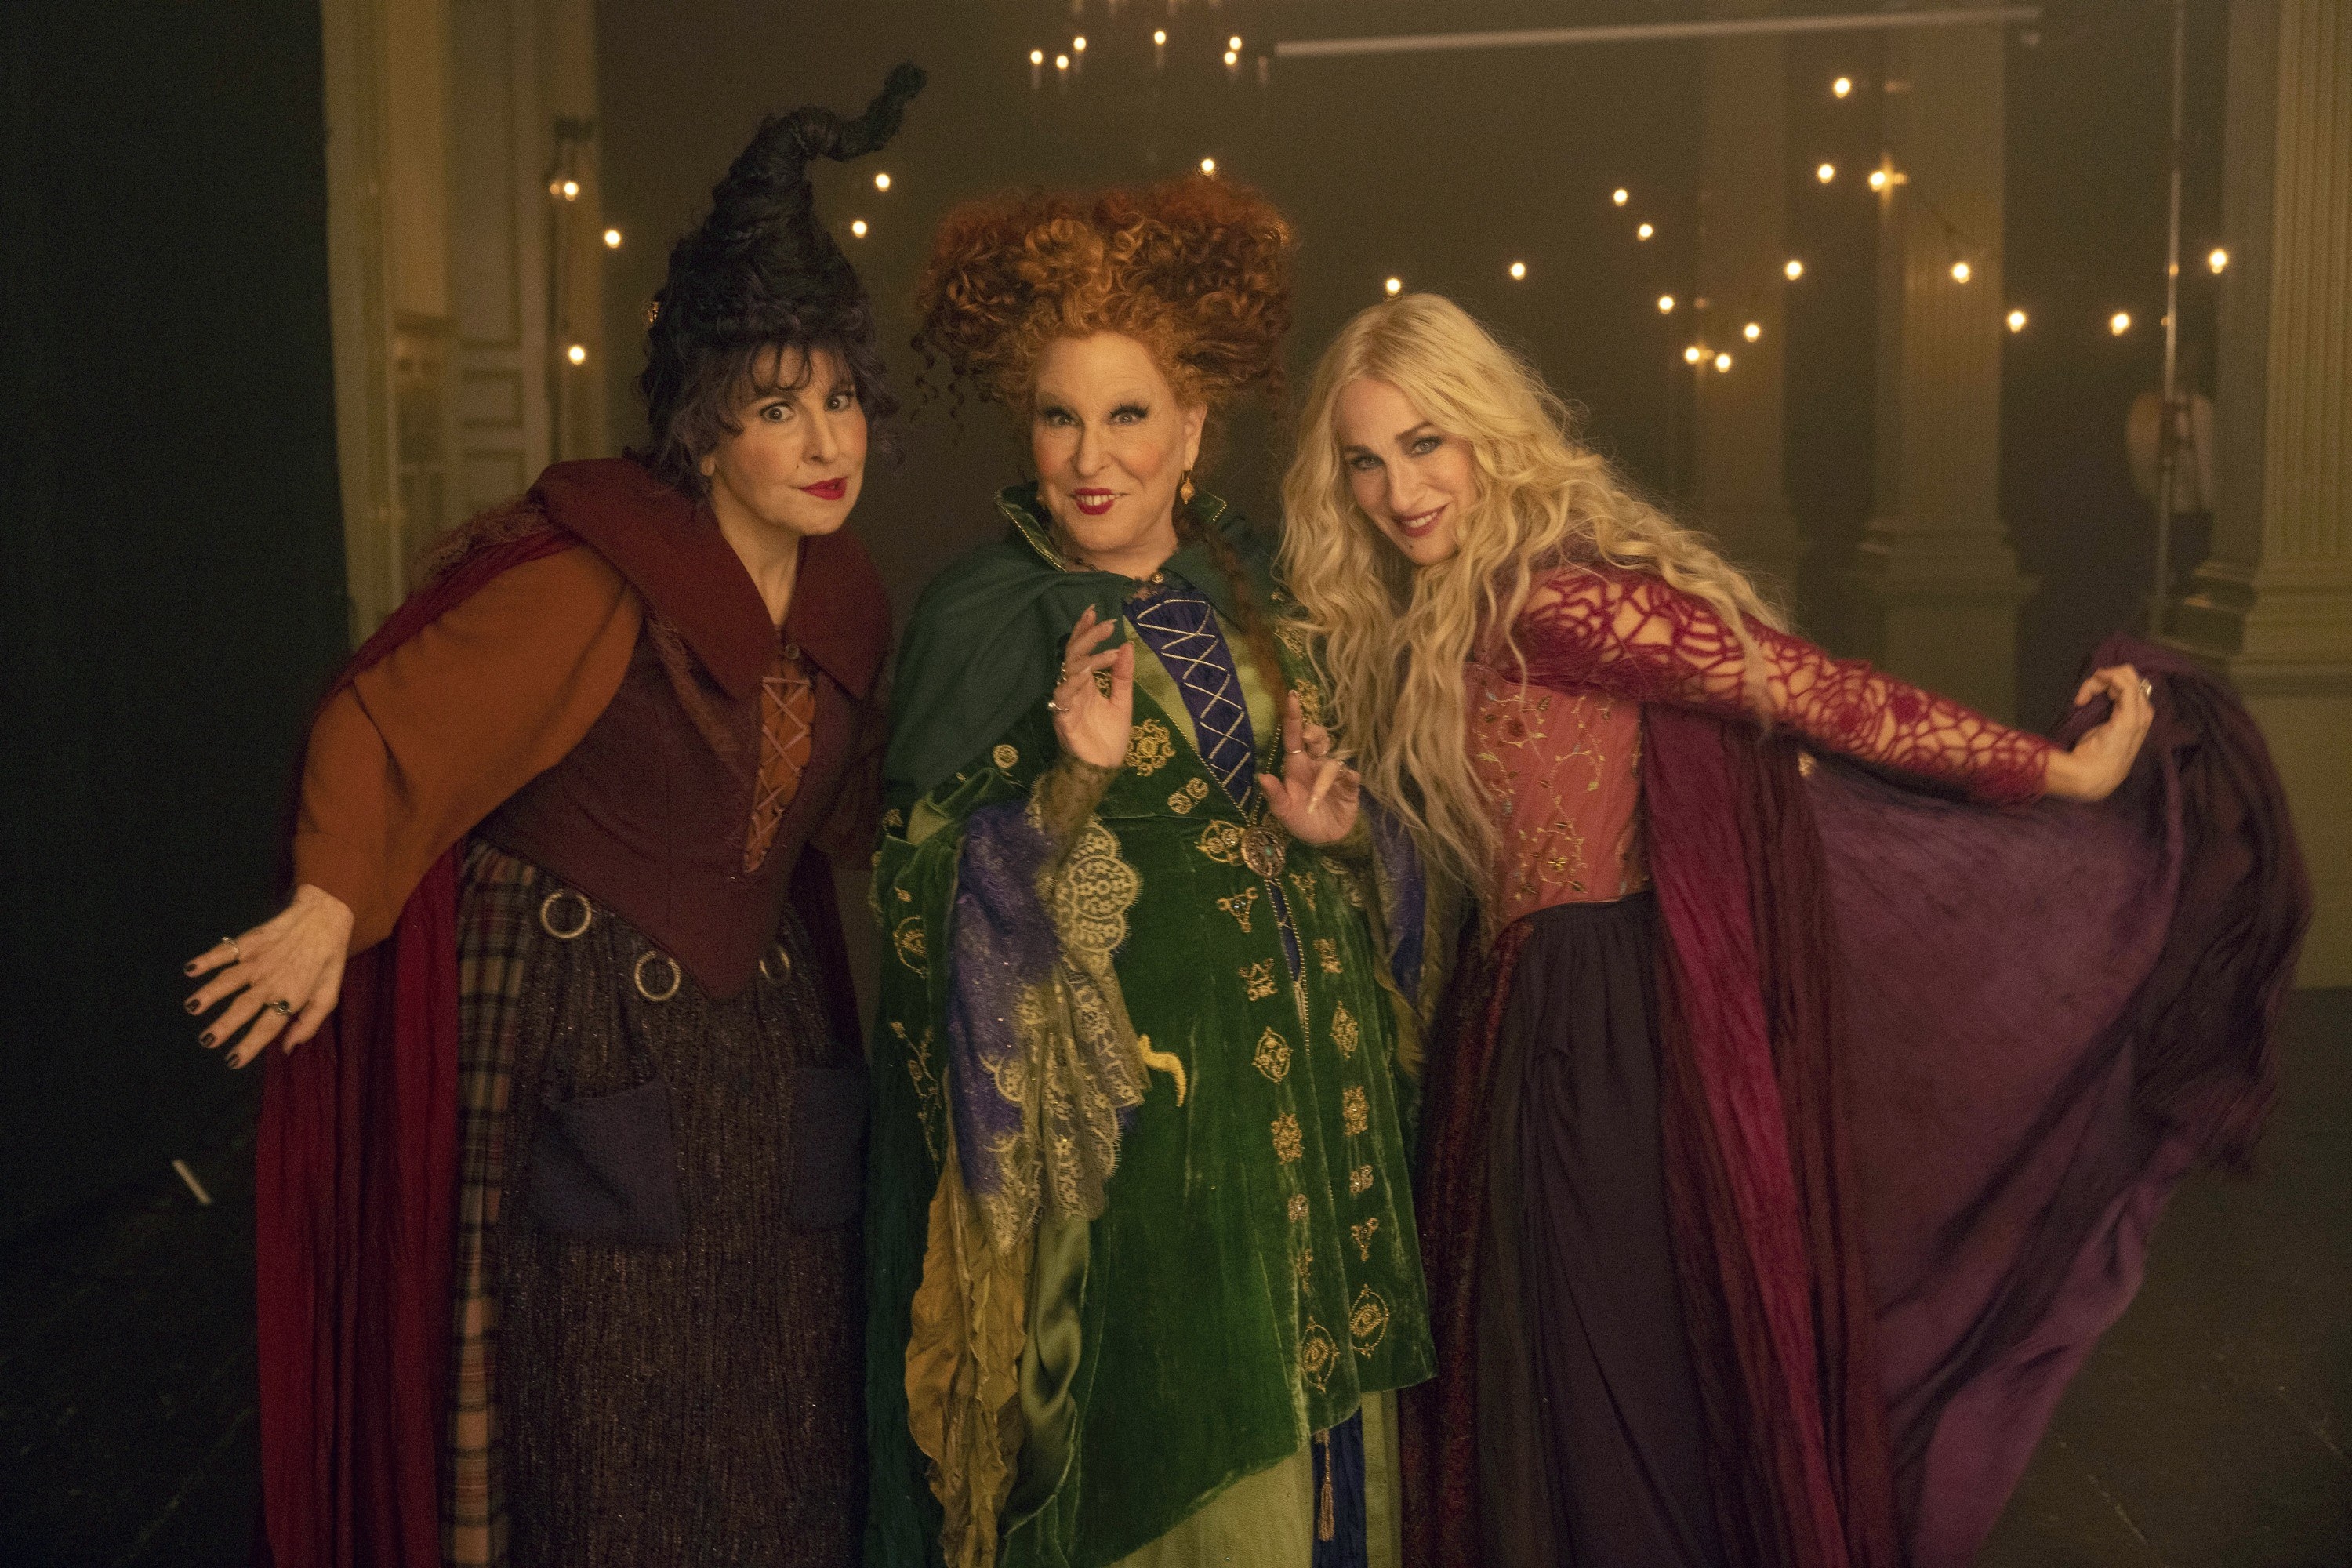 Kathy Najimy, Bette Middler and Sarah Jessica Parker in Hocus Pocus 2